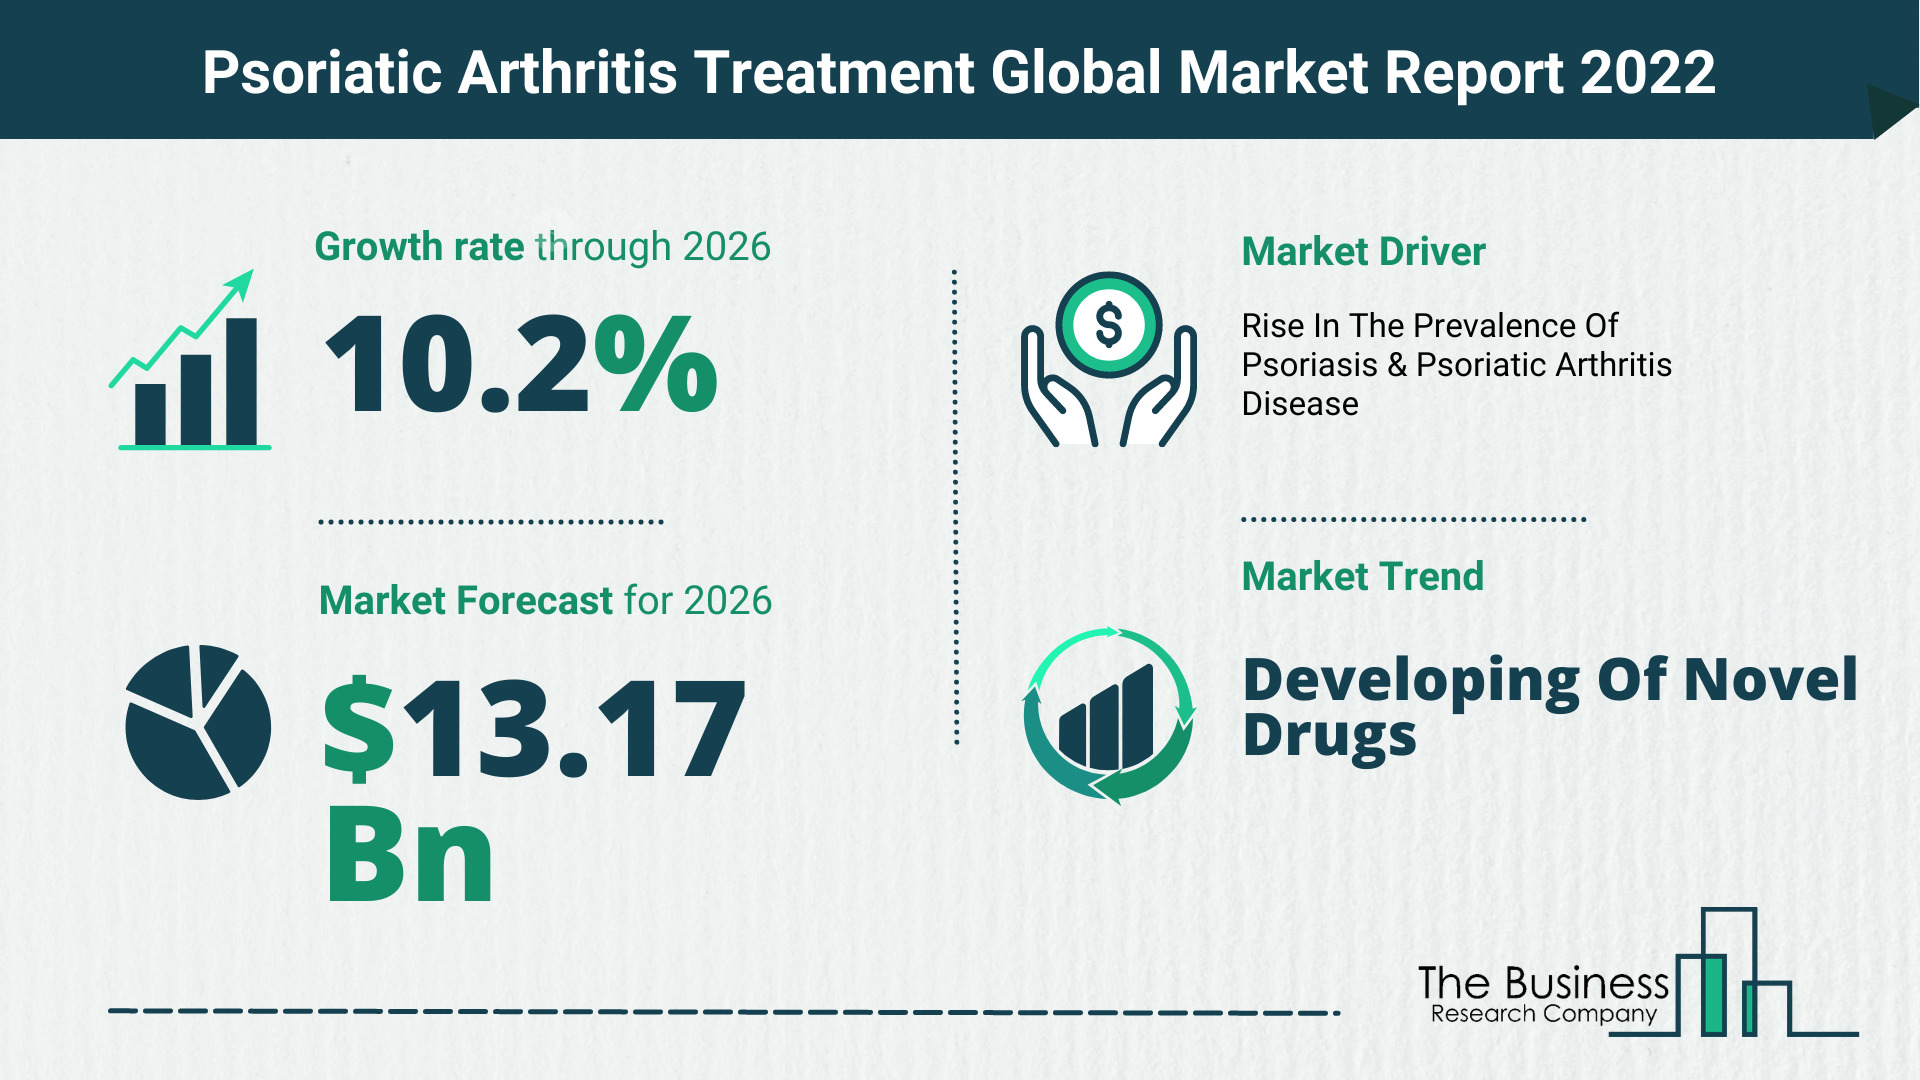 What Is The Psoriatic Arthritis Treatment Market Overview In 2022?